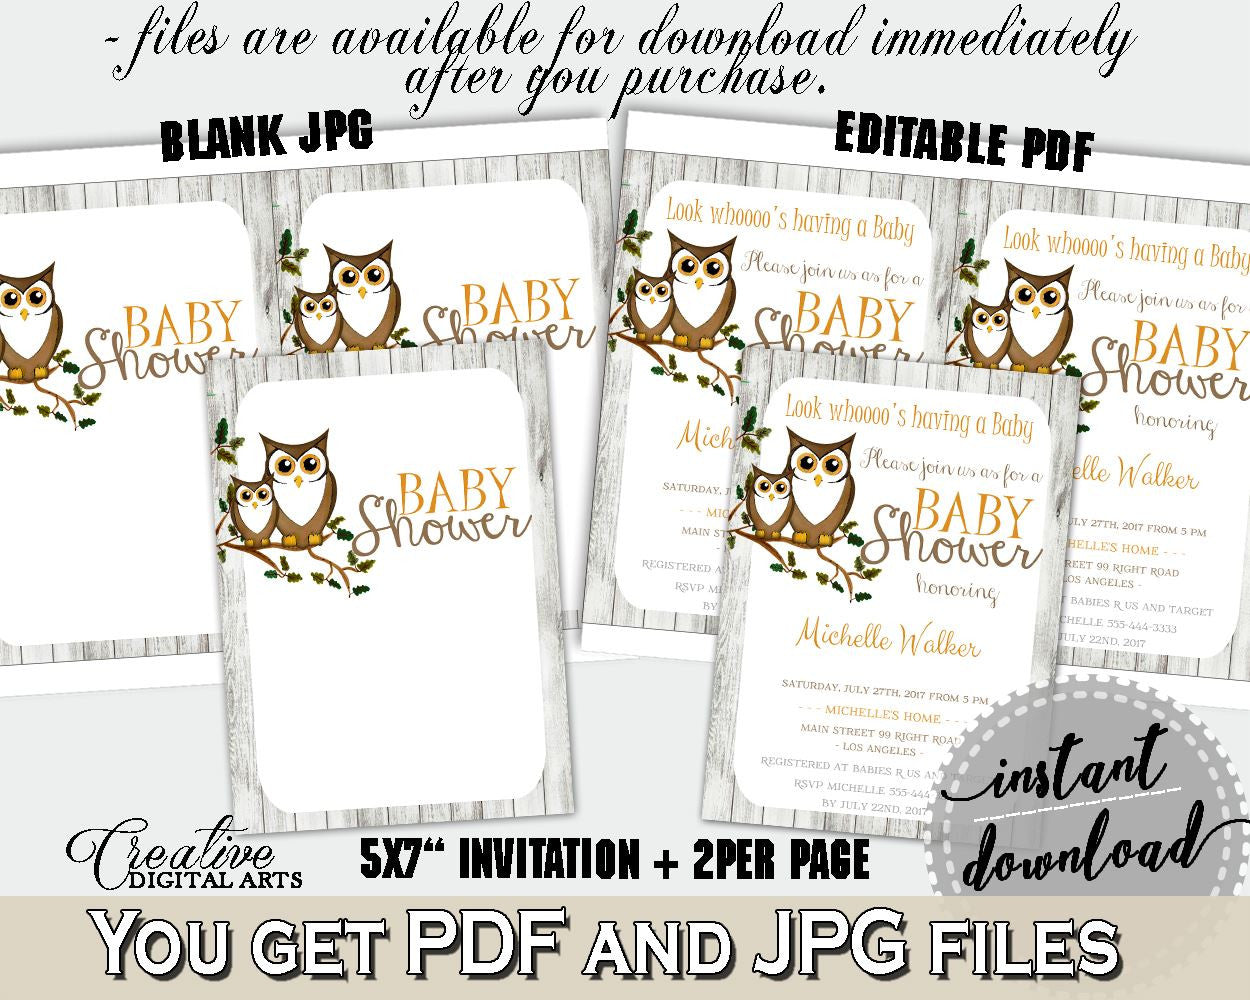 Invitation Baby Shower Invitation Owl Baby Shower Invitation Baby Shower Owl Invitation Gray Brown party theme, customizable files 9PUAC - Digital Product